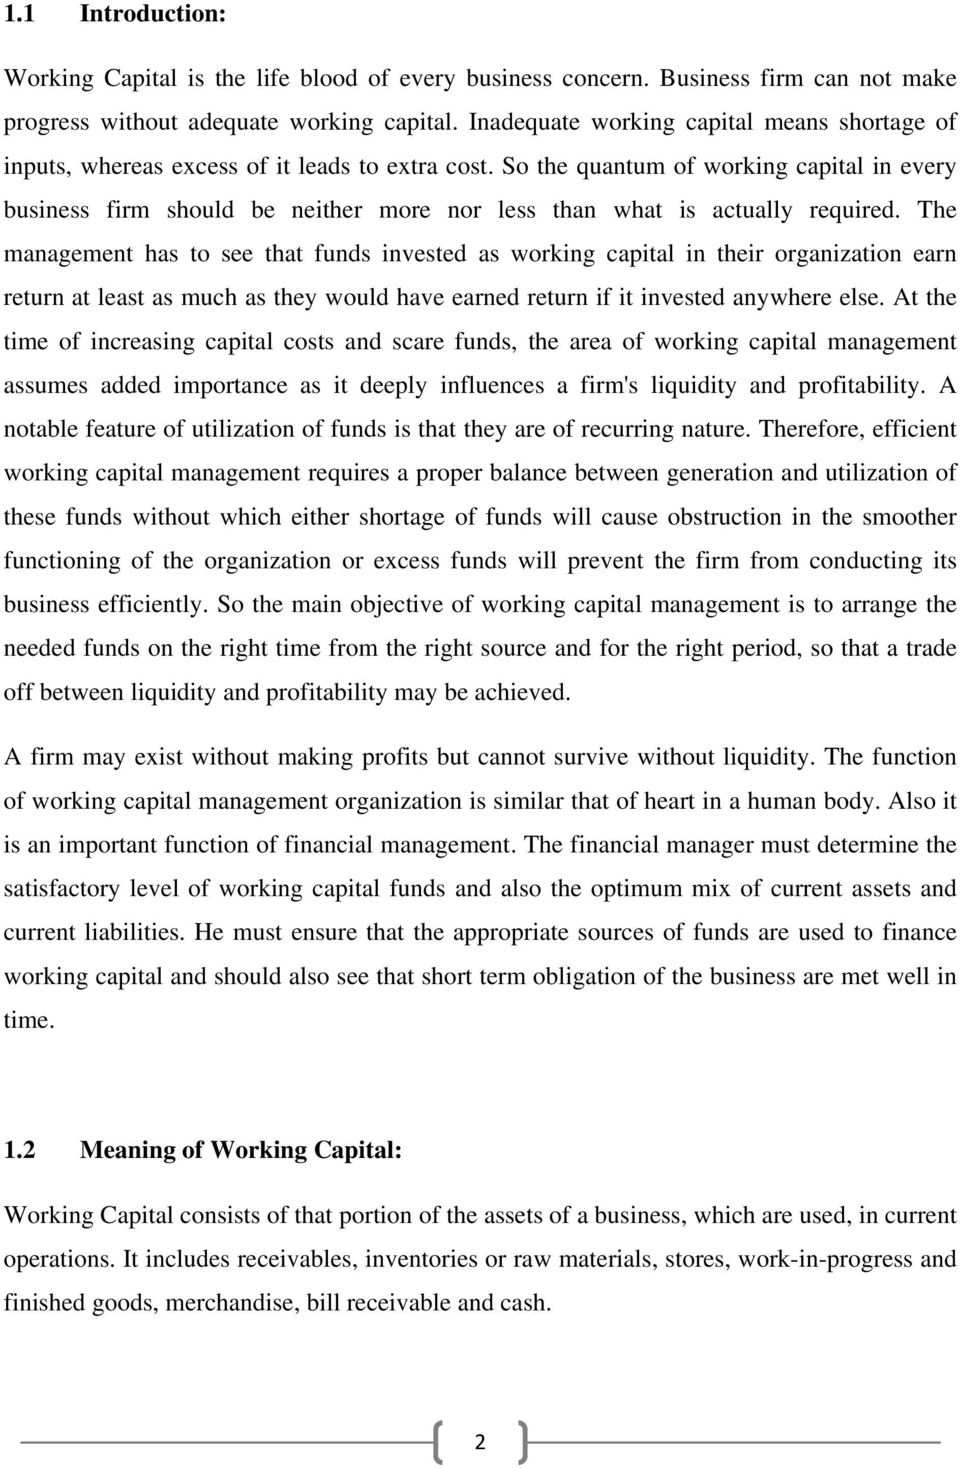 So the quantum of working capital in every business firm should be neither more nor less than what is actually required.